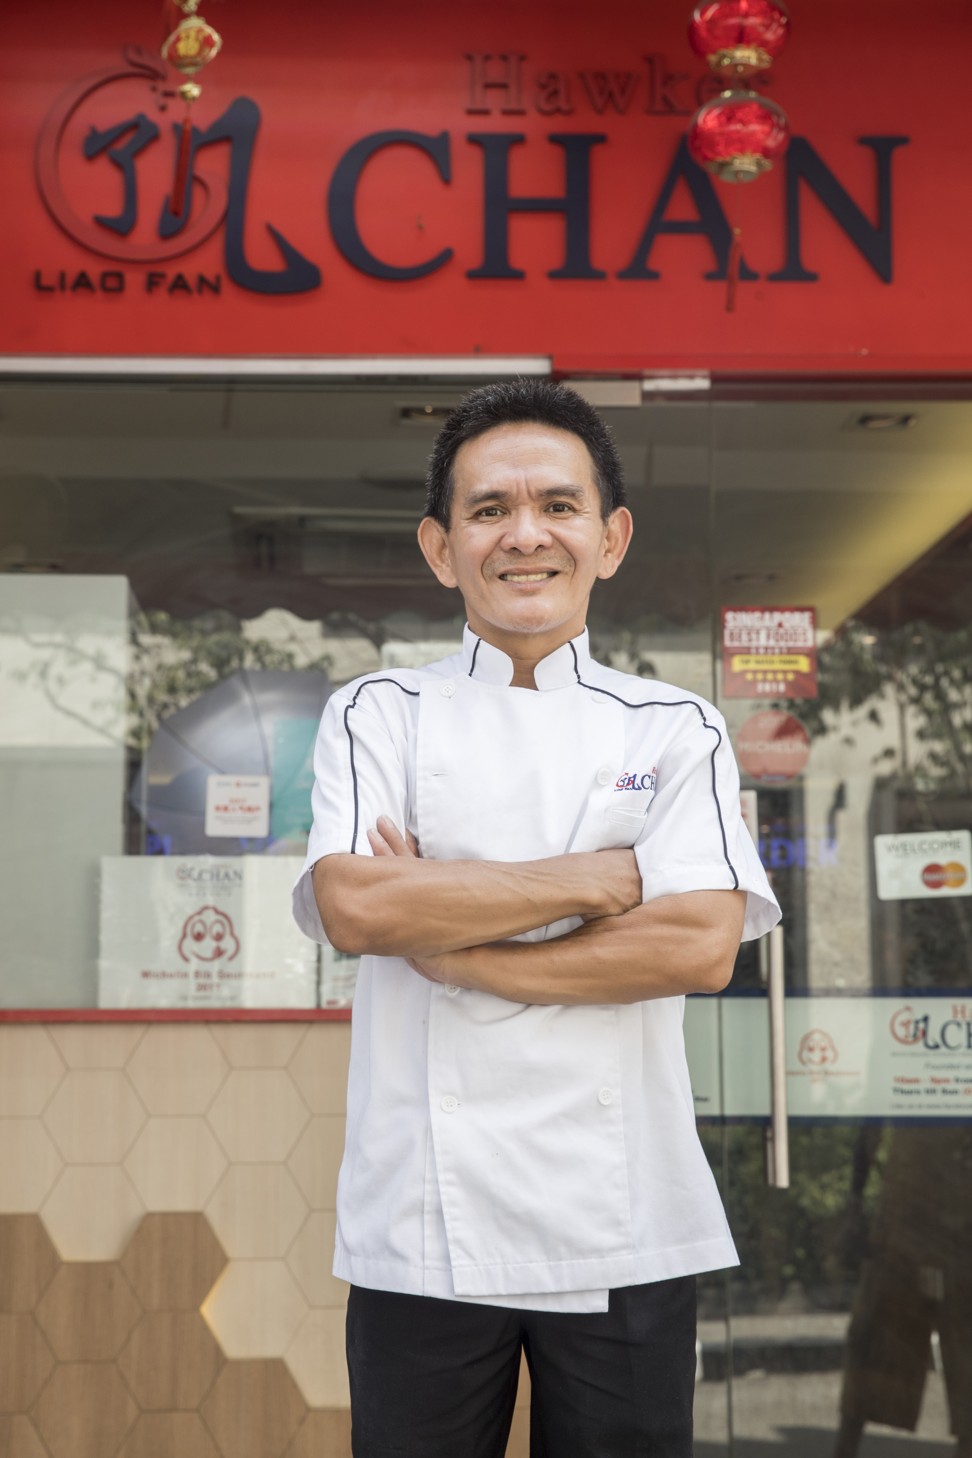 Chef Chan Hon Meng, who has earned a Michelin star for his street food, outside Liao Fan Hawker Chan restaurant in Singapore.